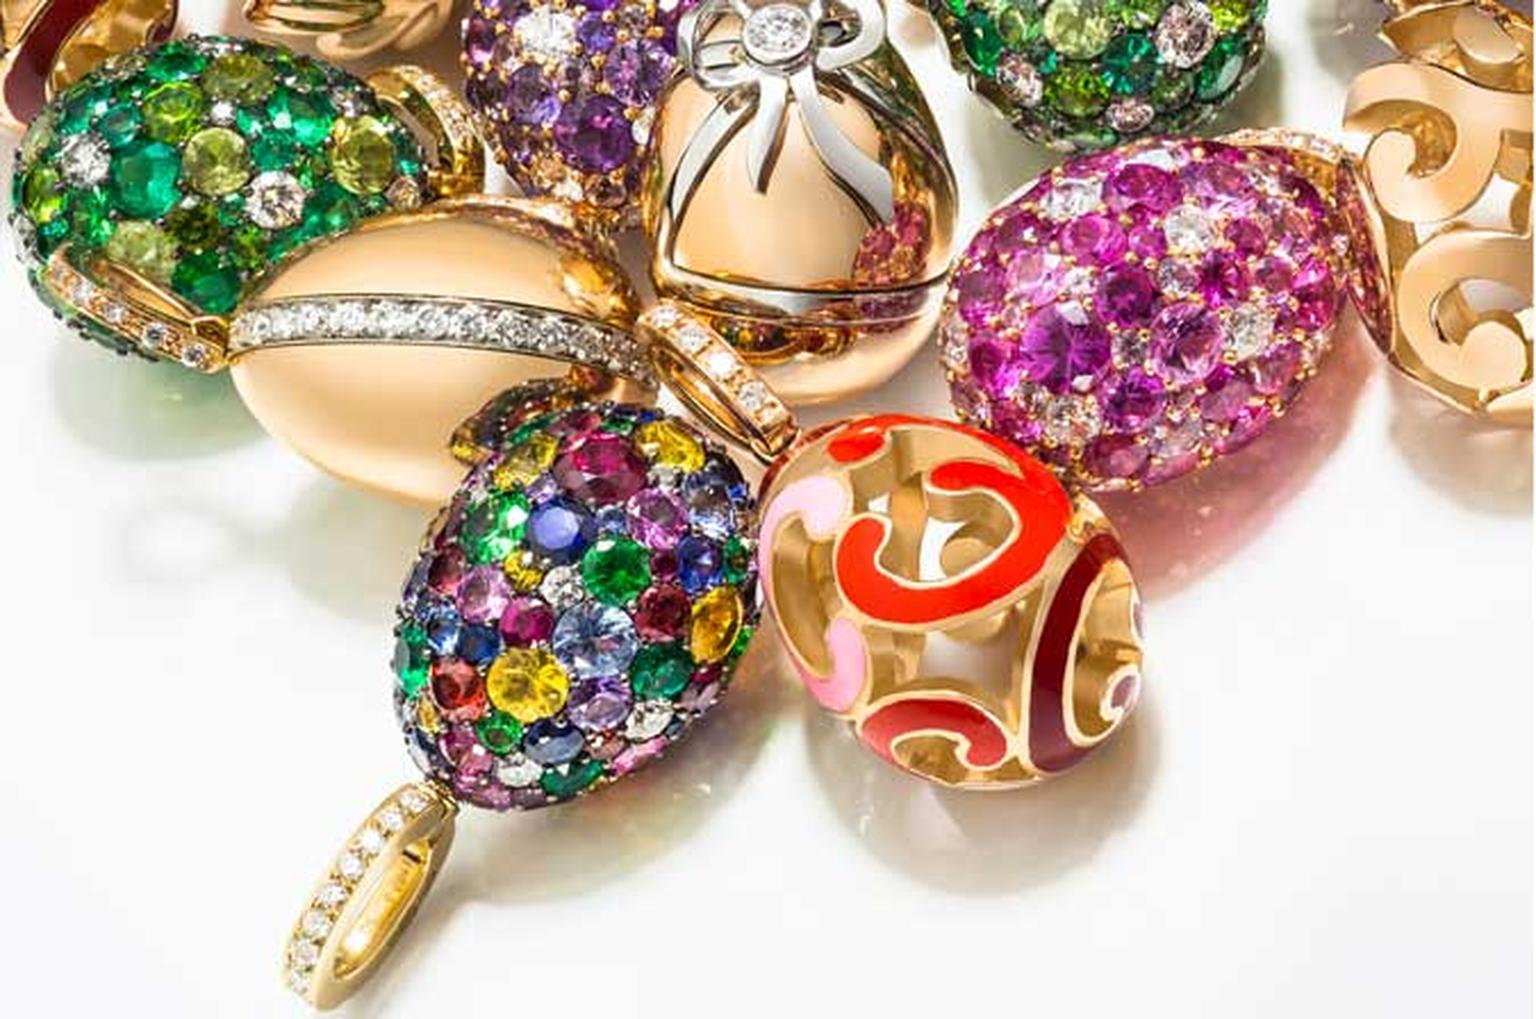 Faberge egg charms